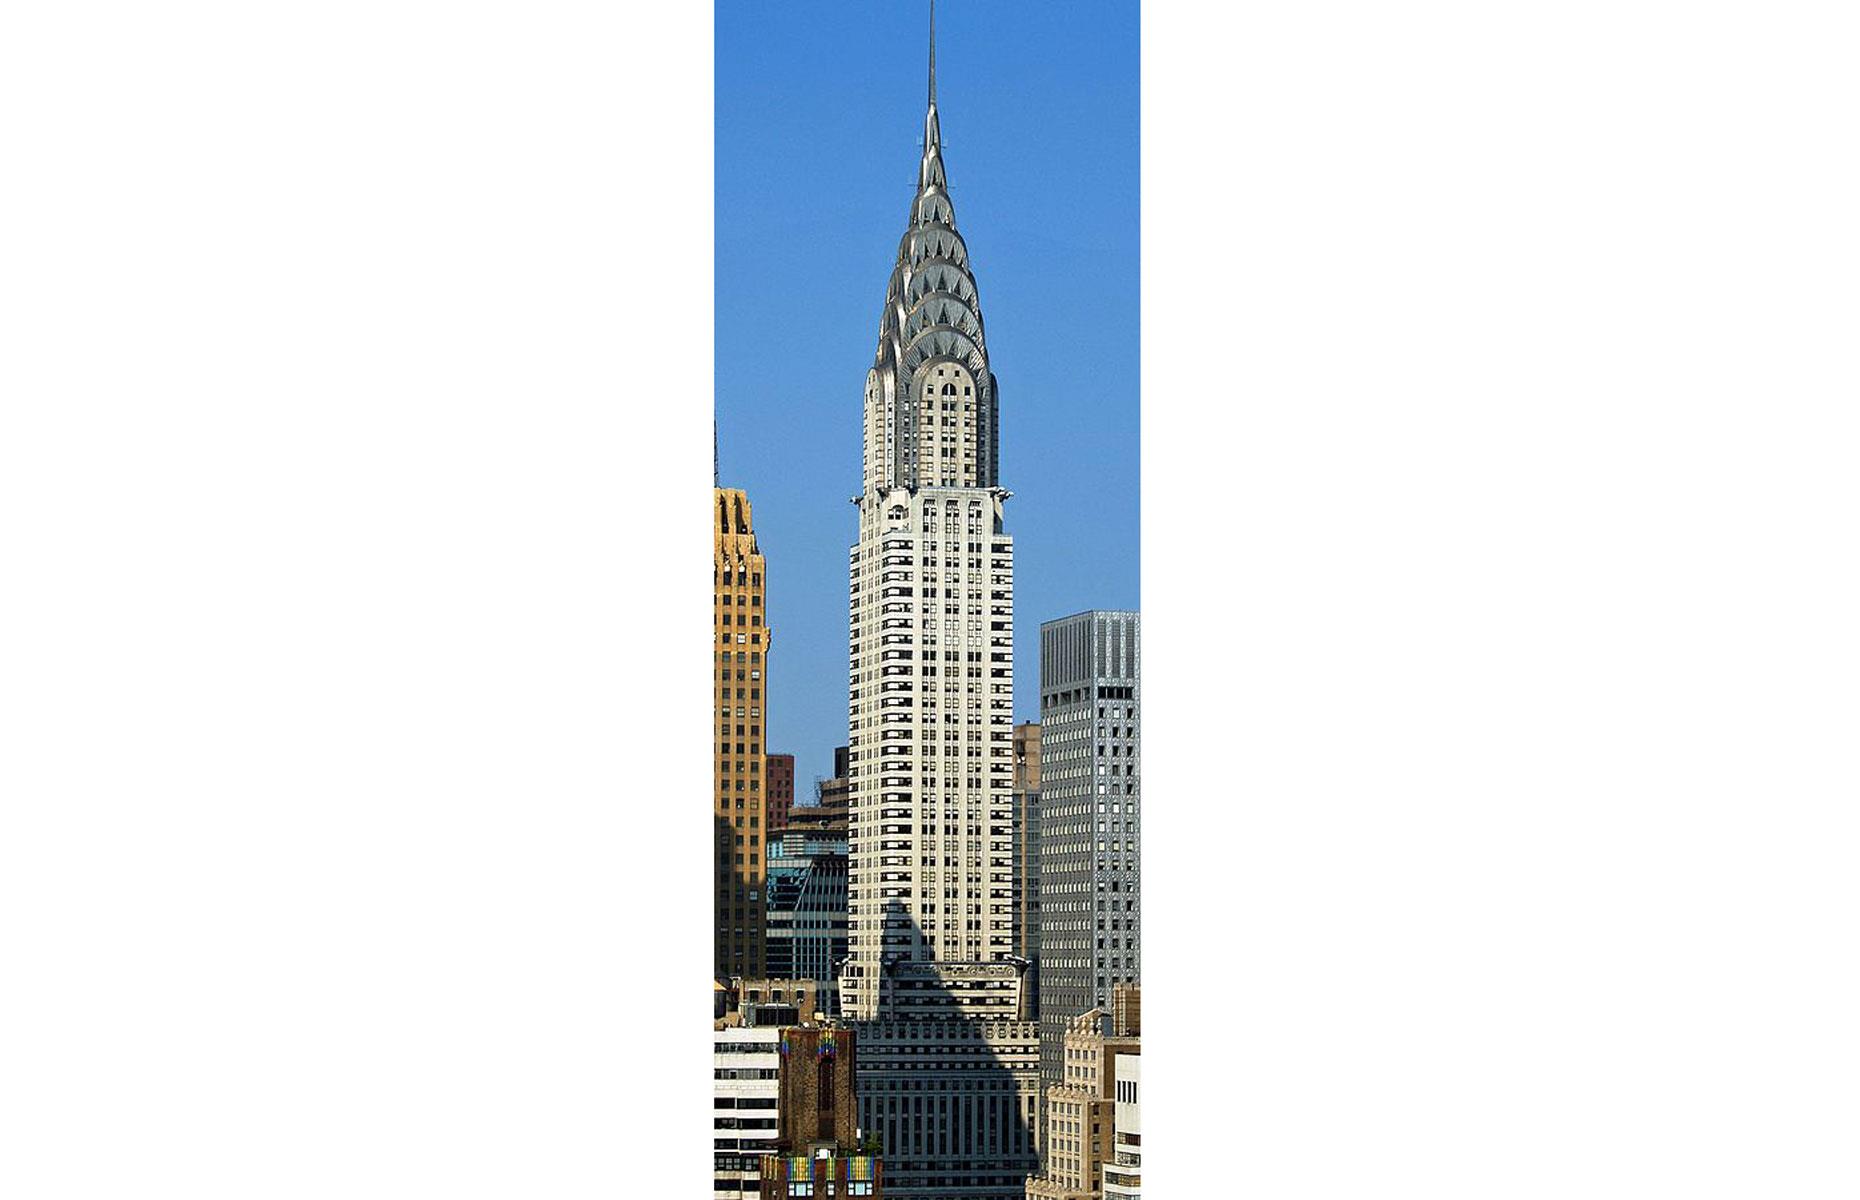 Arguably the most beautiful skyscraper in the world, the magnificent Chrysler Building in Manhattan is an Art Deco masterpiece adored by New Yorkers and visitors to the city alike. The iconic building was designed by William Van Alen and completed in 1931.